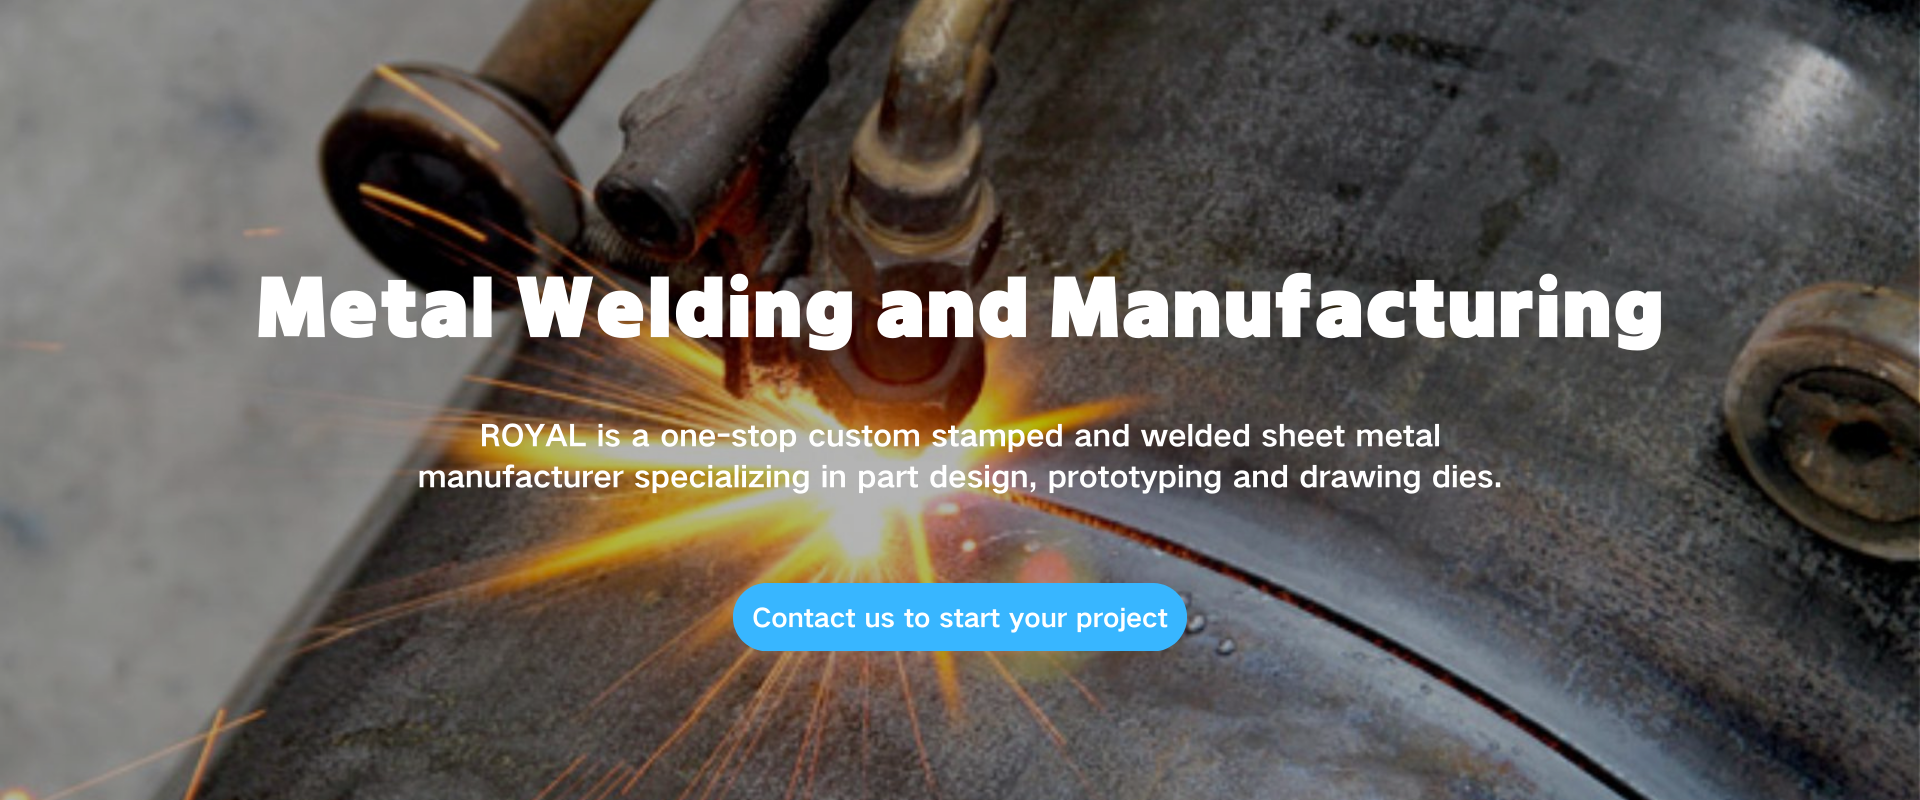 Metal welding and manufacturing